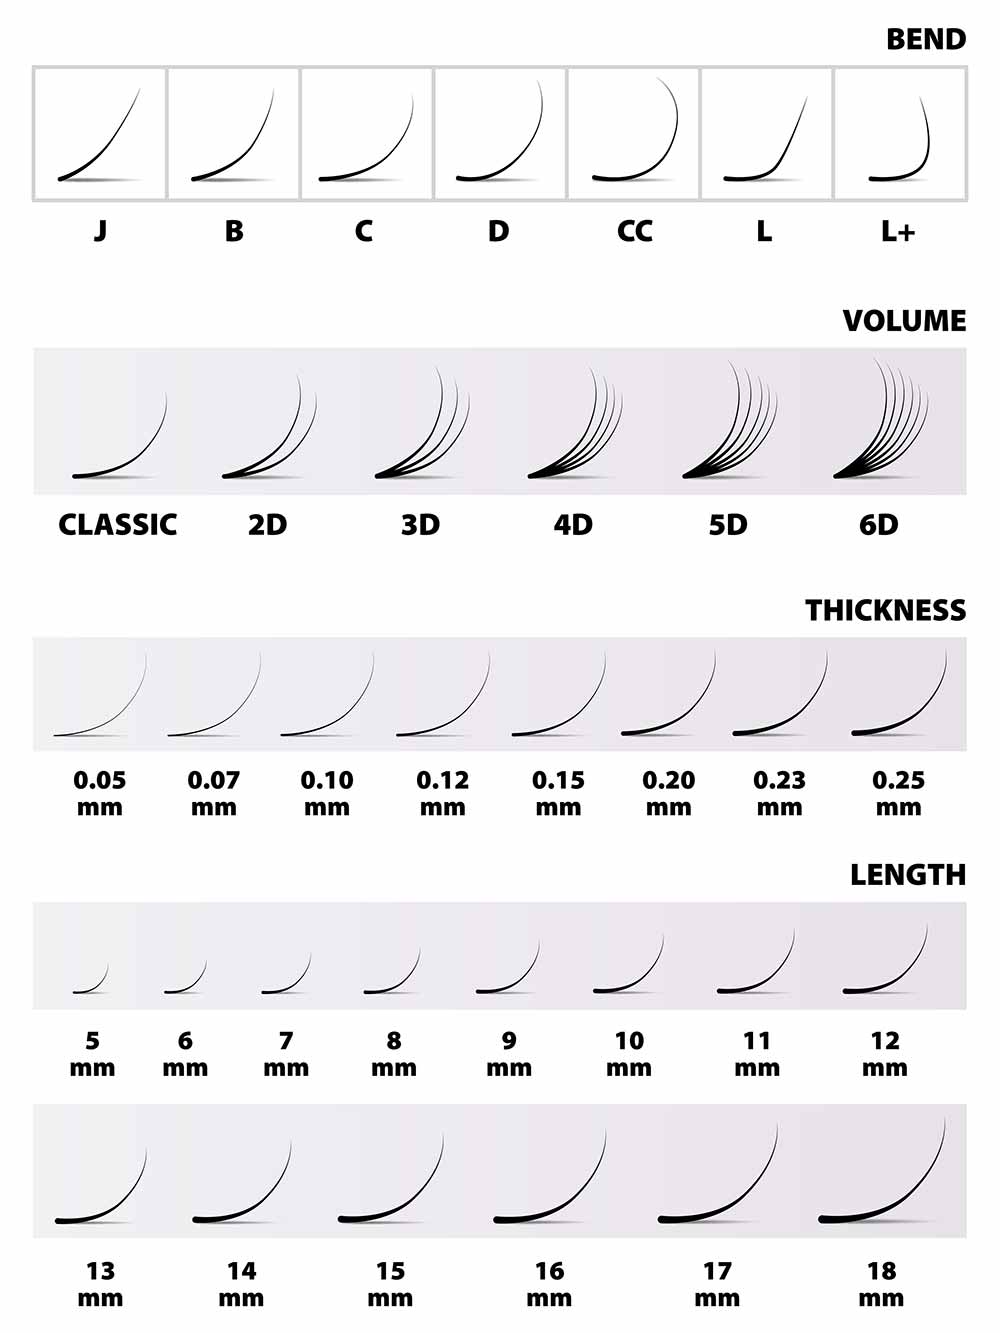 Eyelash extensions size chart and curl lashes , j curl, b curl, c, curl, d curl, cc curl, l curl